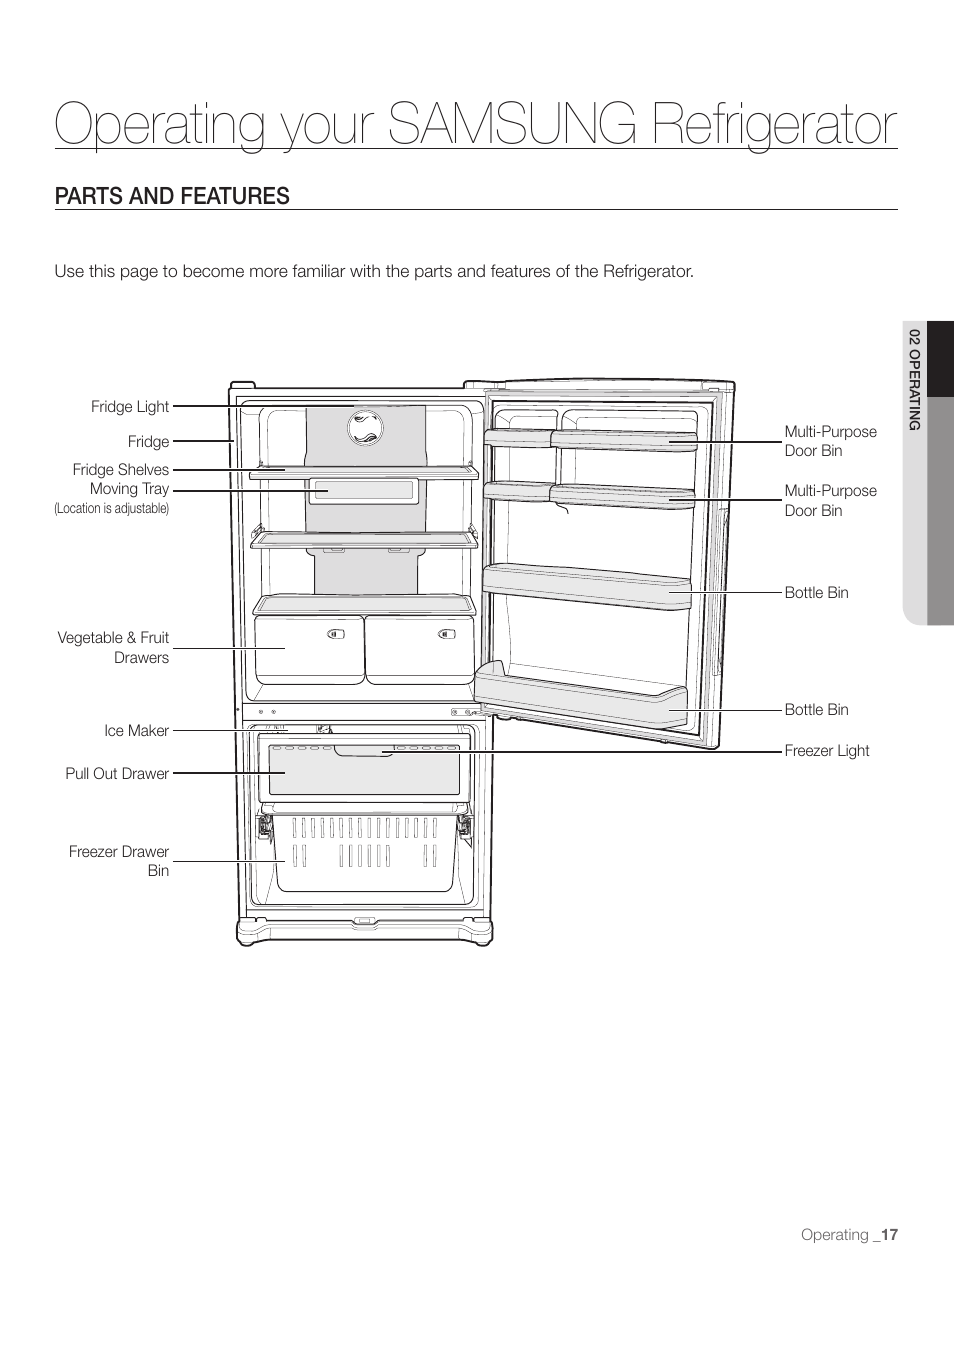 Operating your samsung refrigerator, Parts and features | Samsung